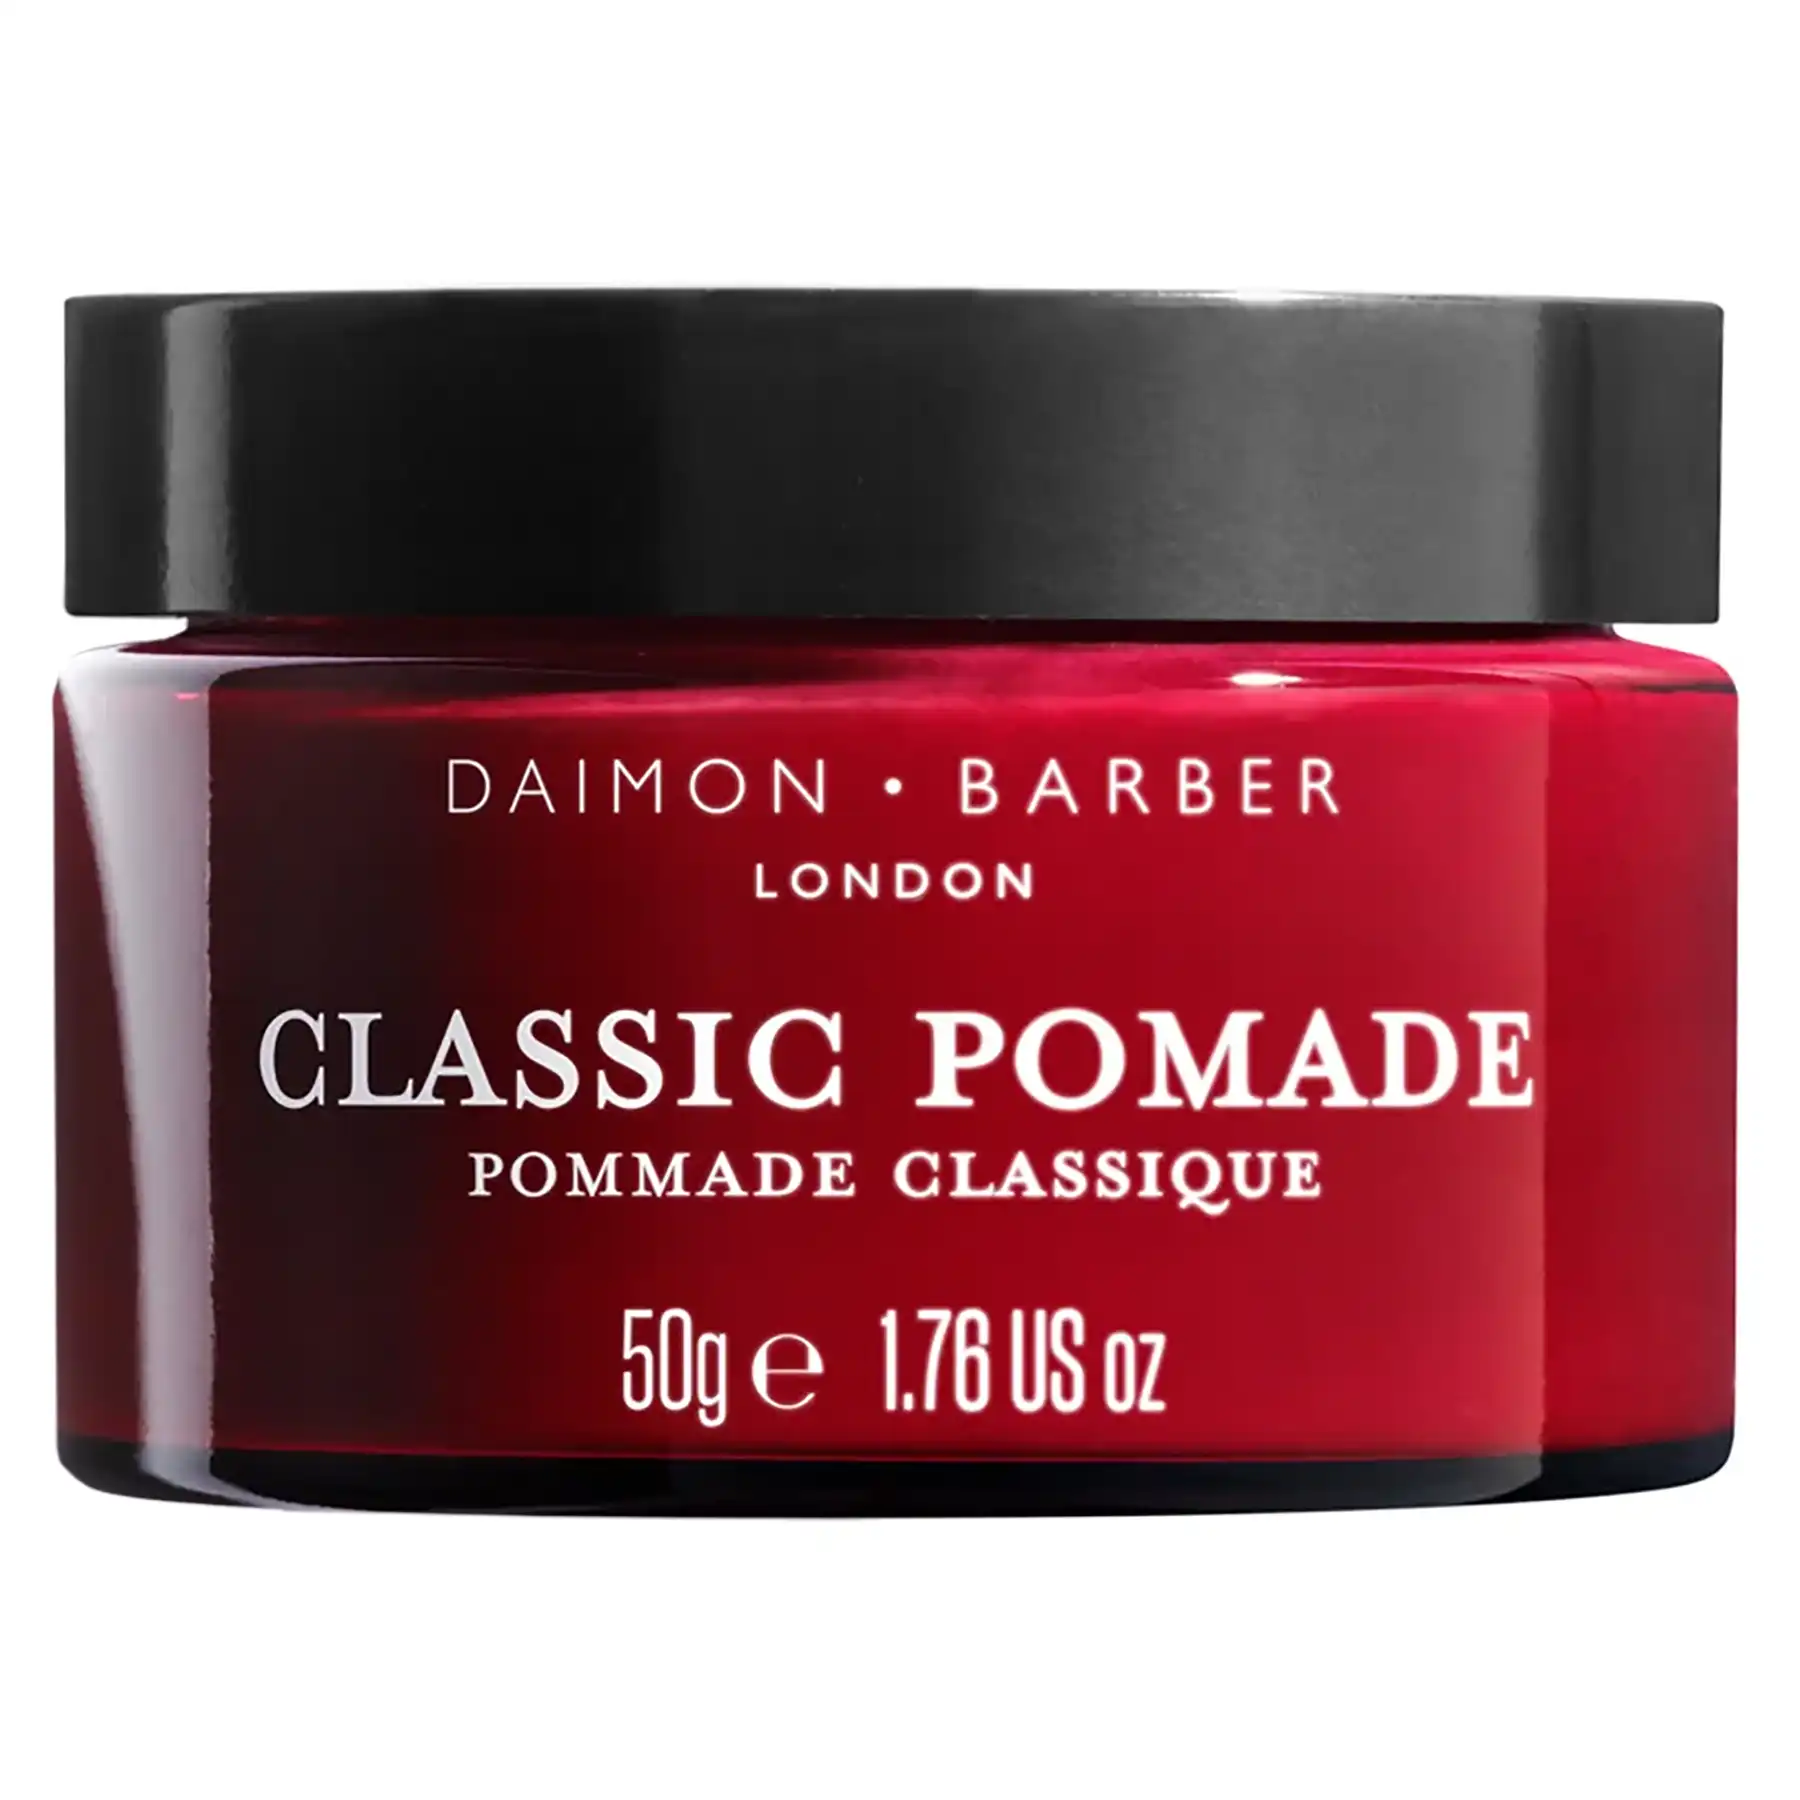 Daimon Barber Classic Pomade 50g